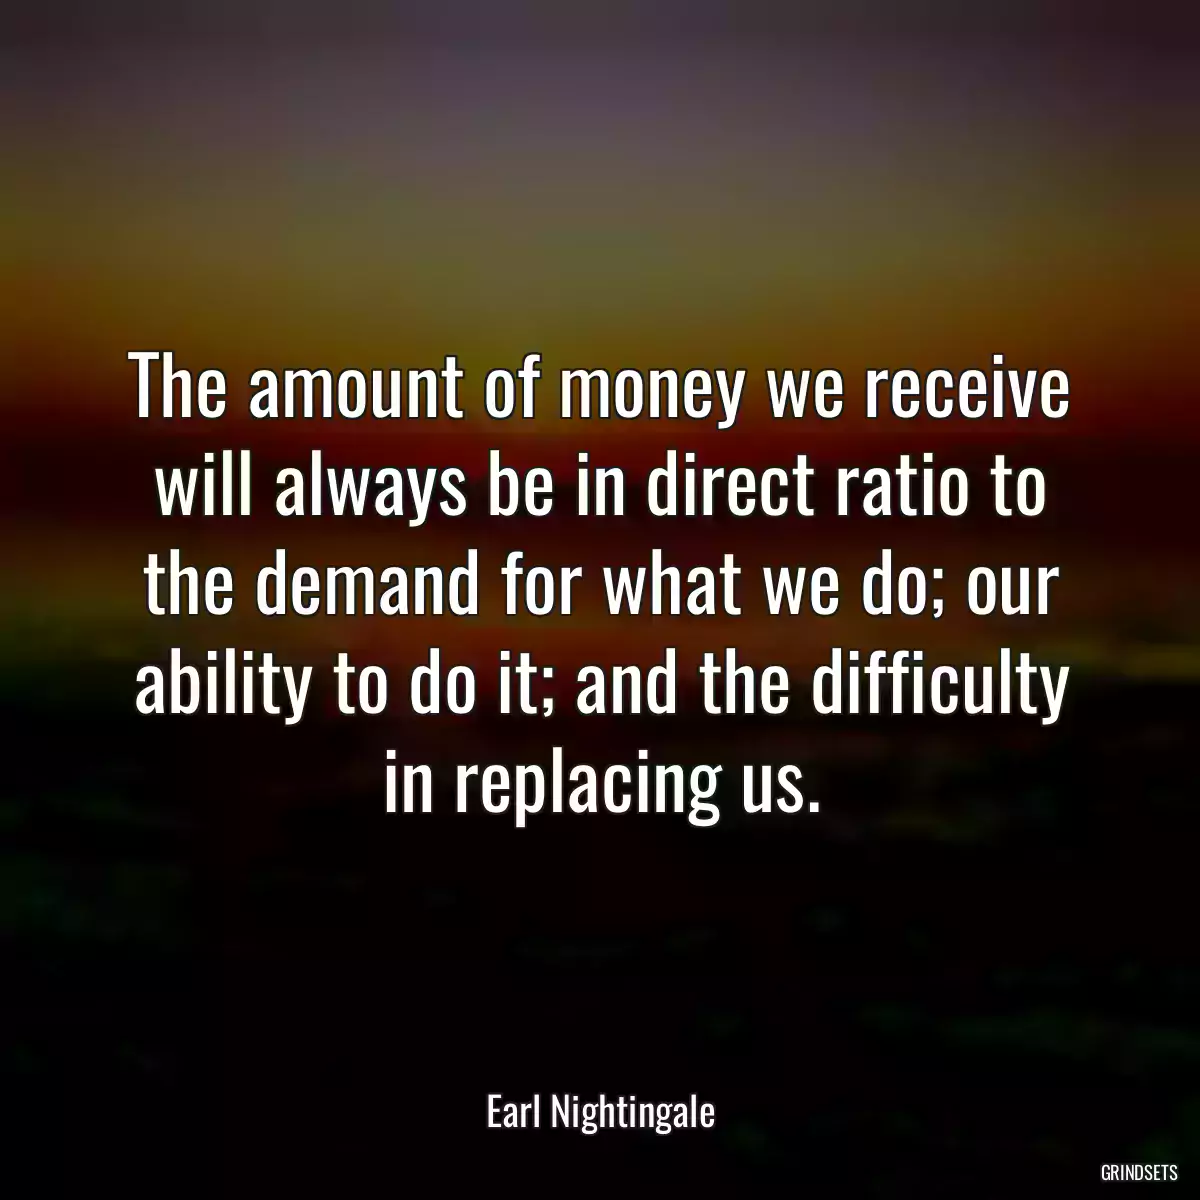 The amount of money we receive will always be in direct ratio to the demand for what we do; our ability to do it; and the difficulty in replacing us.